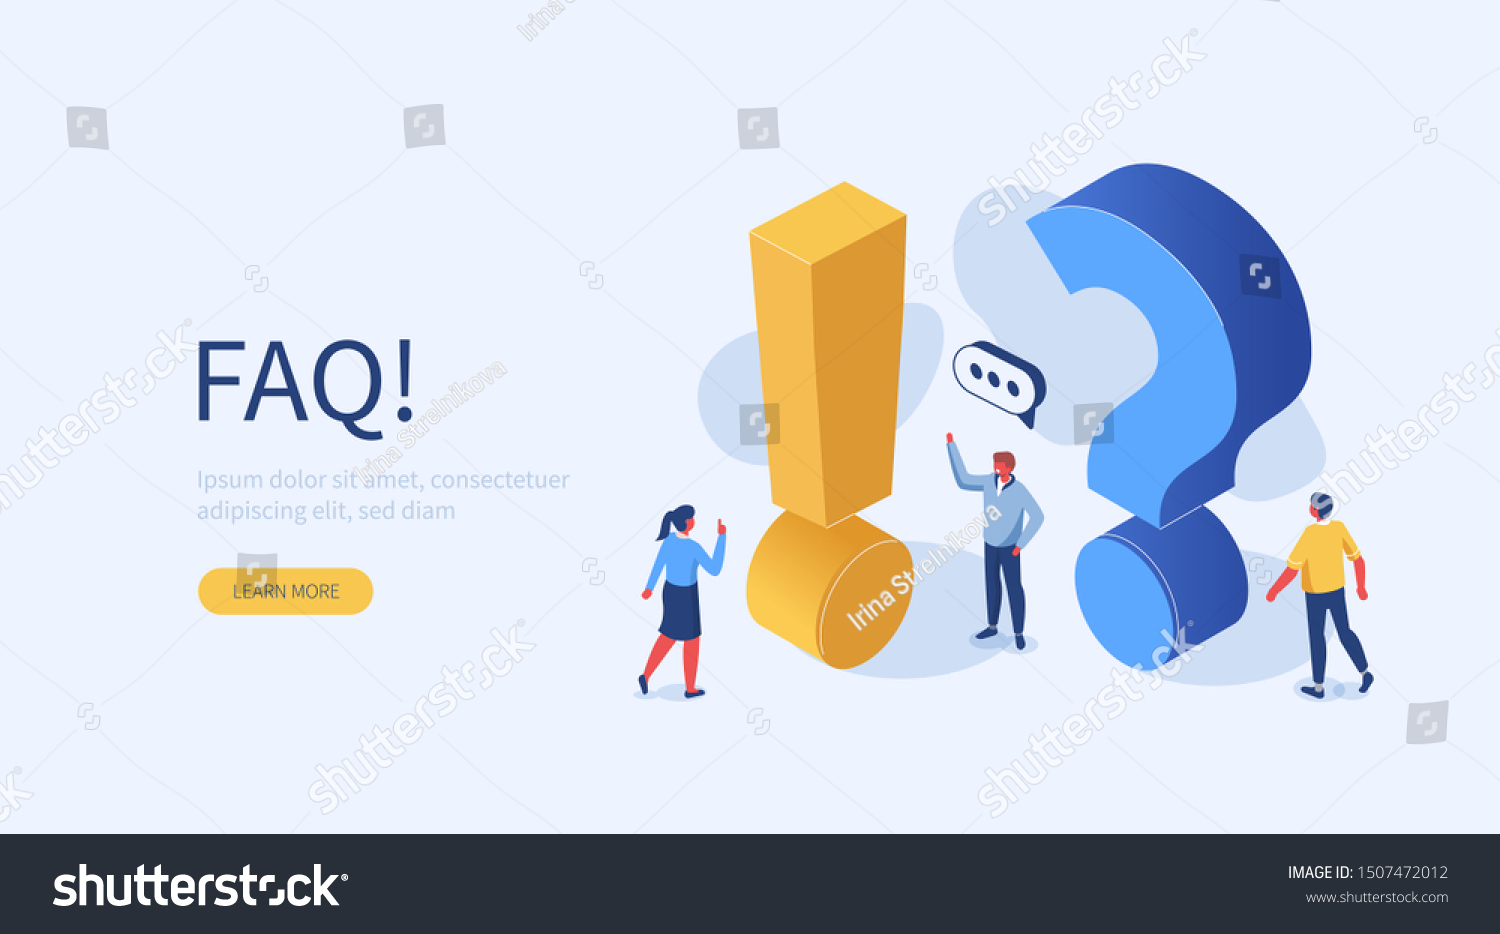 People Characters Standing near Exclamations and Question Marks. Woman and Man Ask Questions and receive Answers. Online Support center. Frequently Asked Questions Concept. Flat Vector Illustration. #1507472012